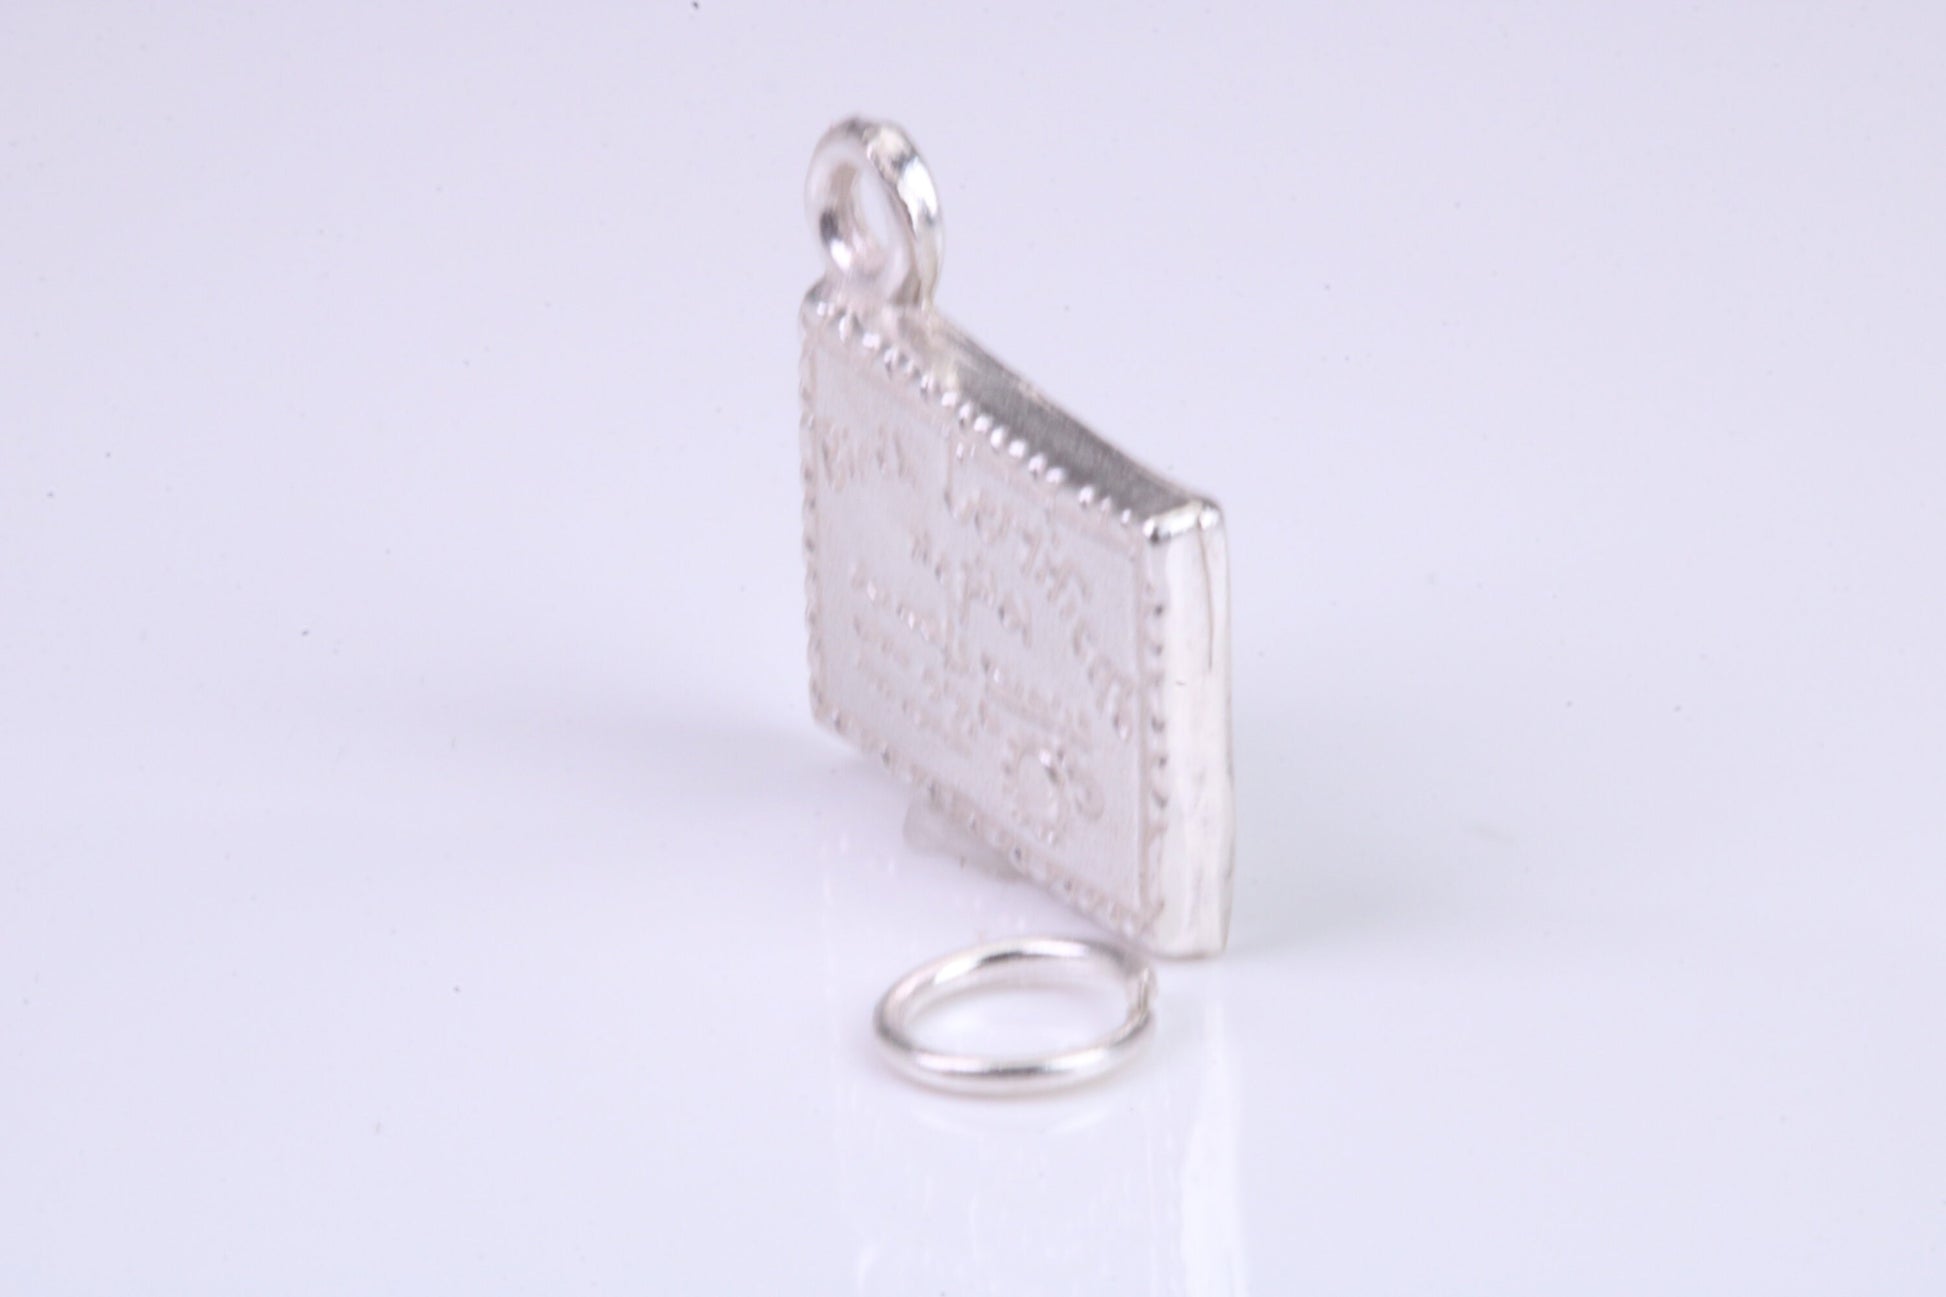 Birth Certificate Charm, Traditional Charm, Made from Solid 925 Grade Sterling Silver, Complete with Attachment Link